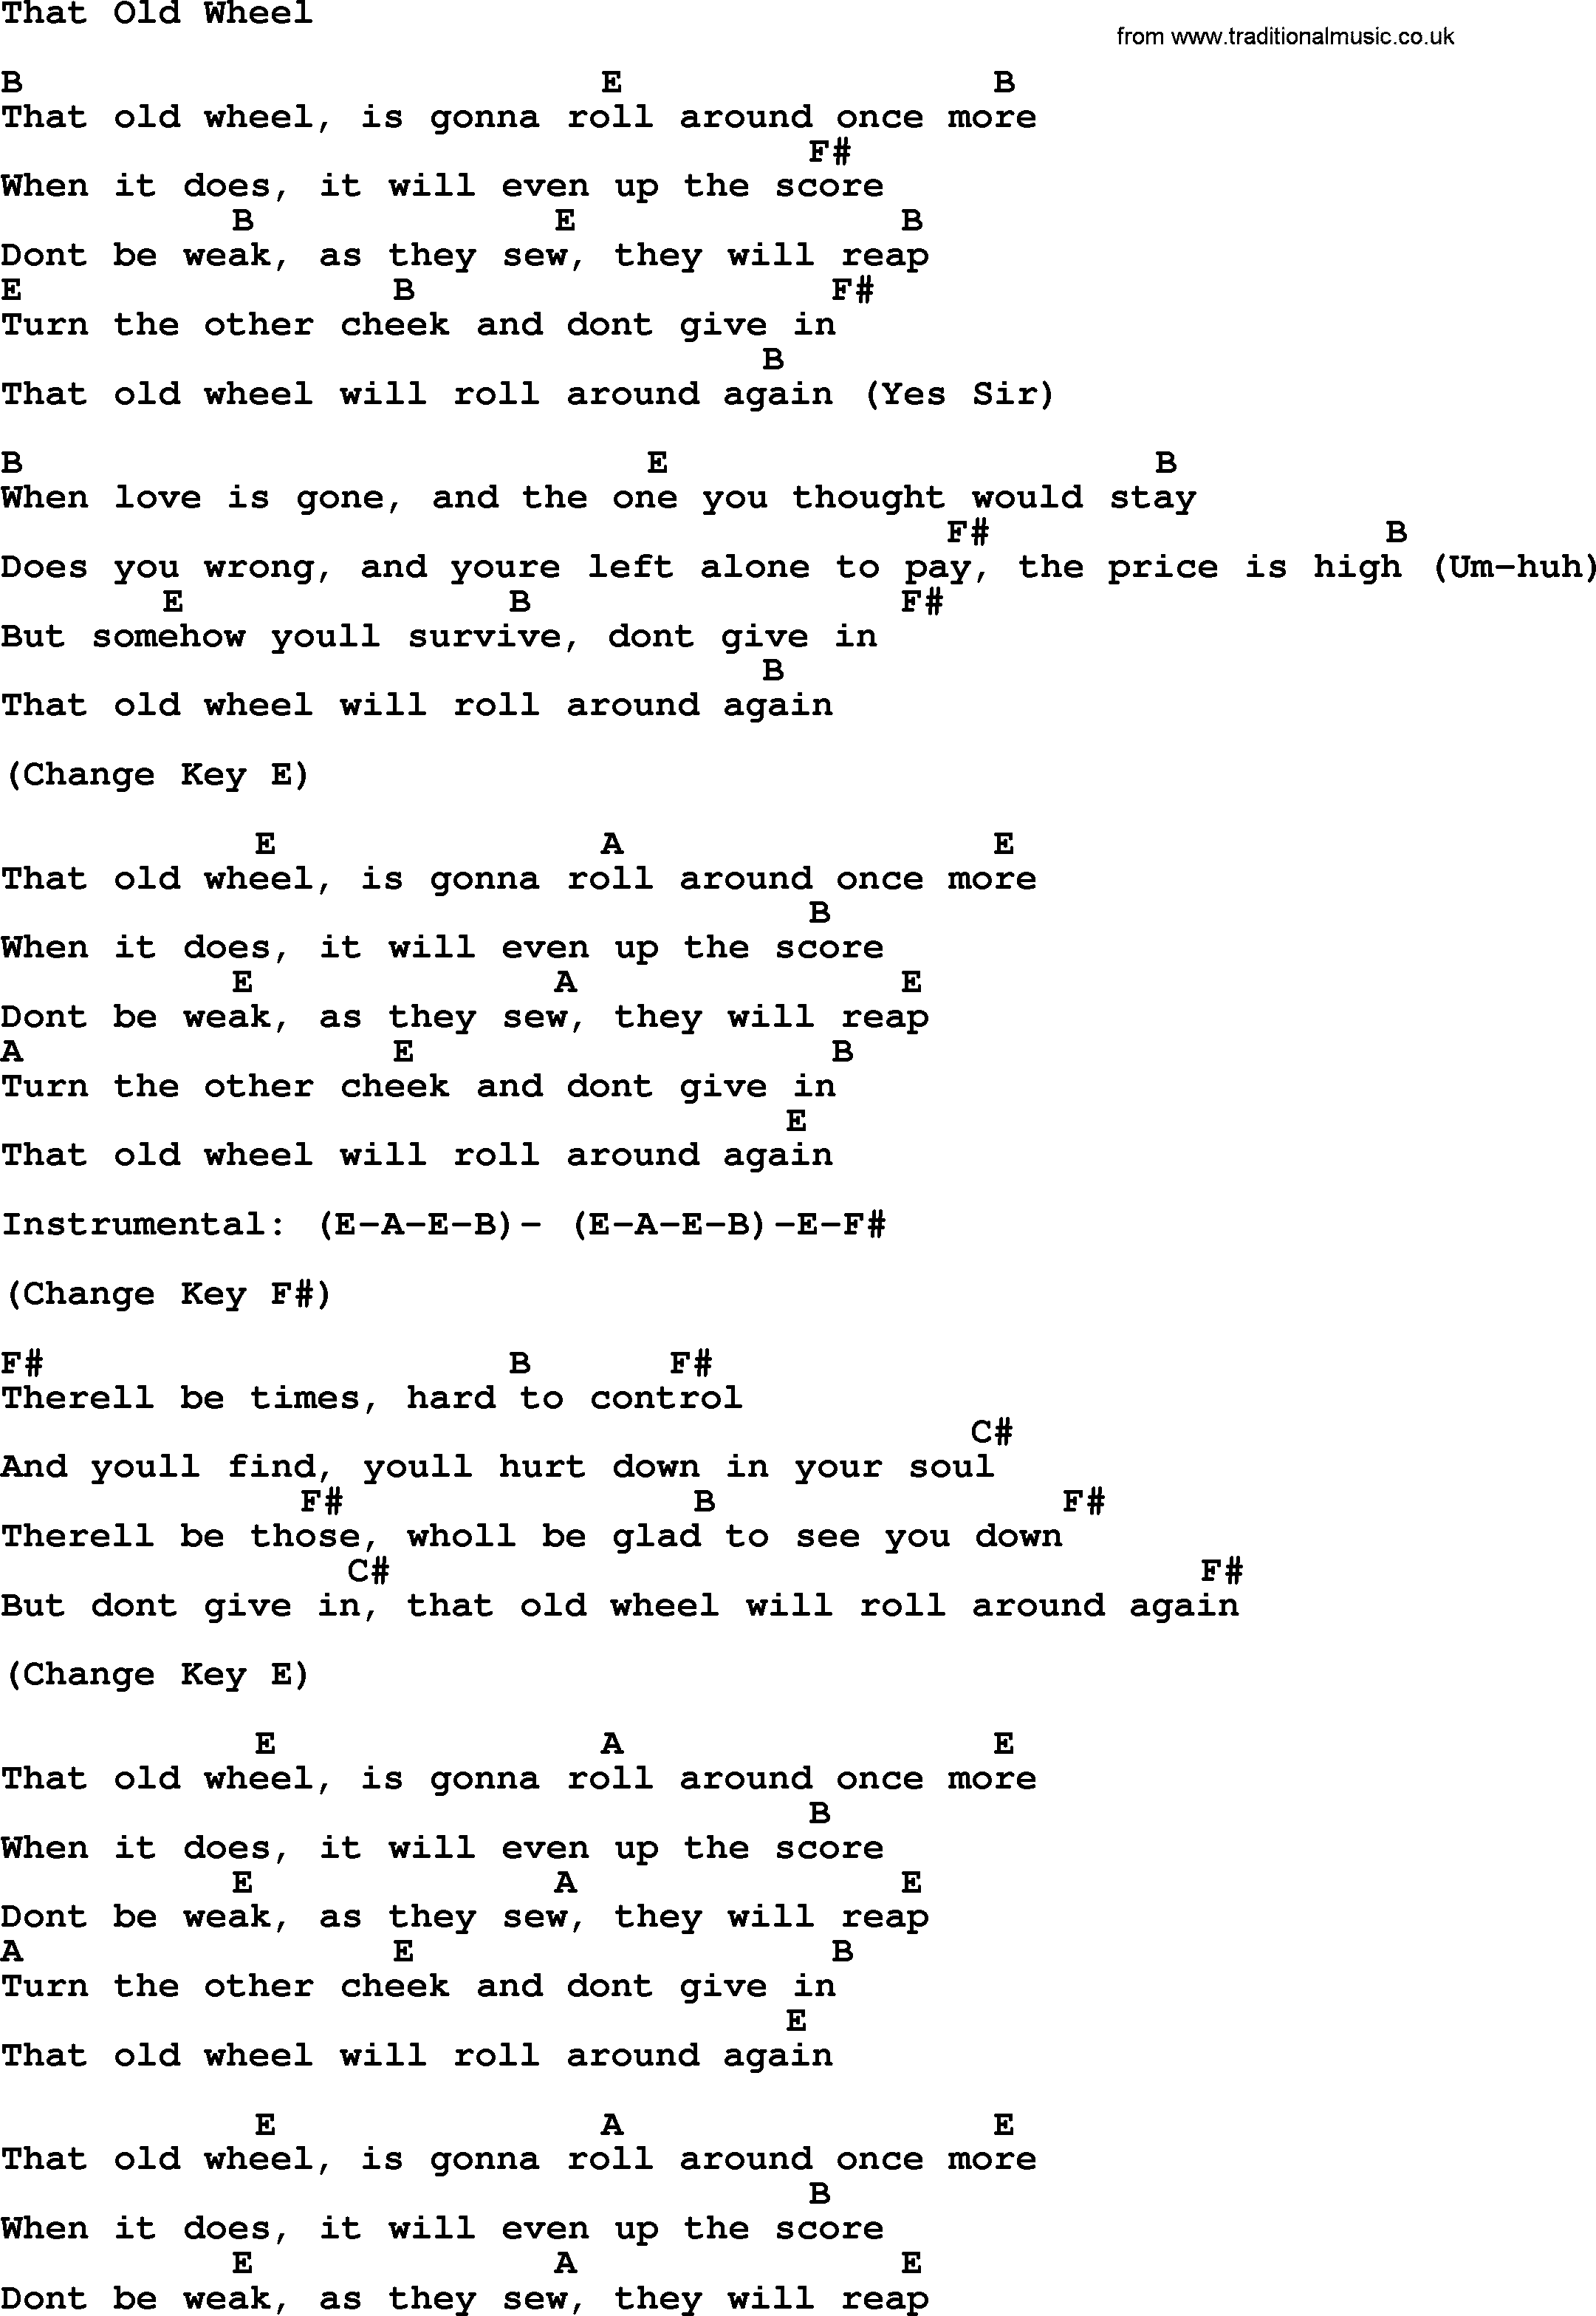 Johnny Cash song That Old Wheel, lyrics and chords